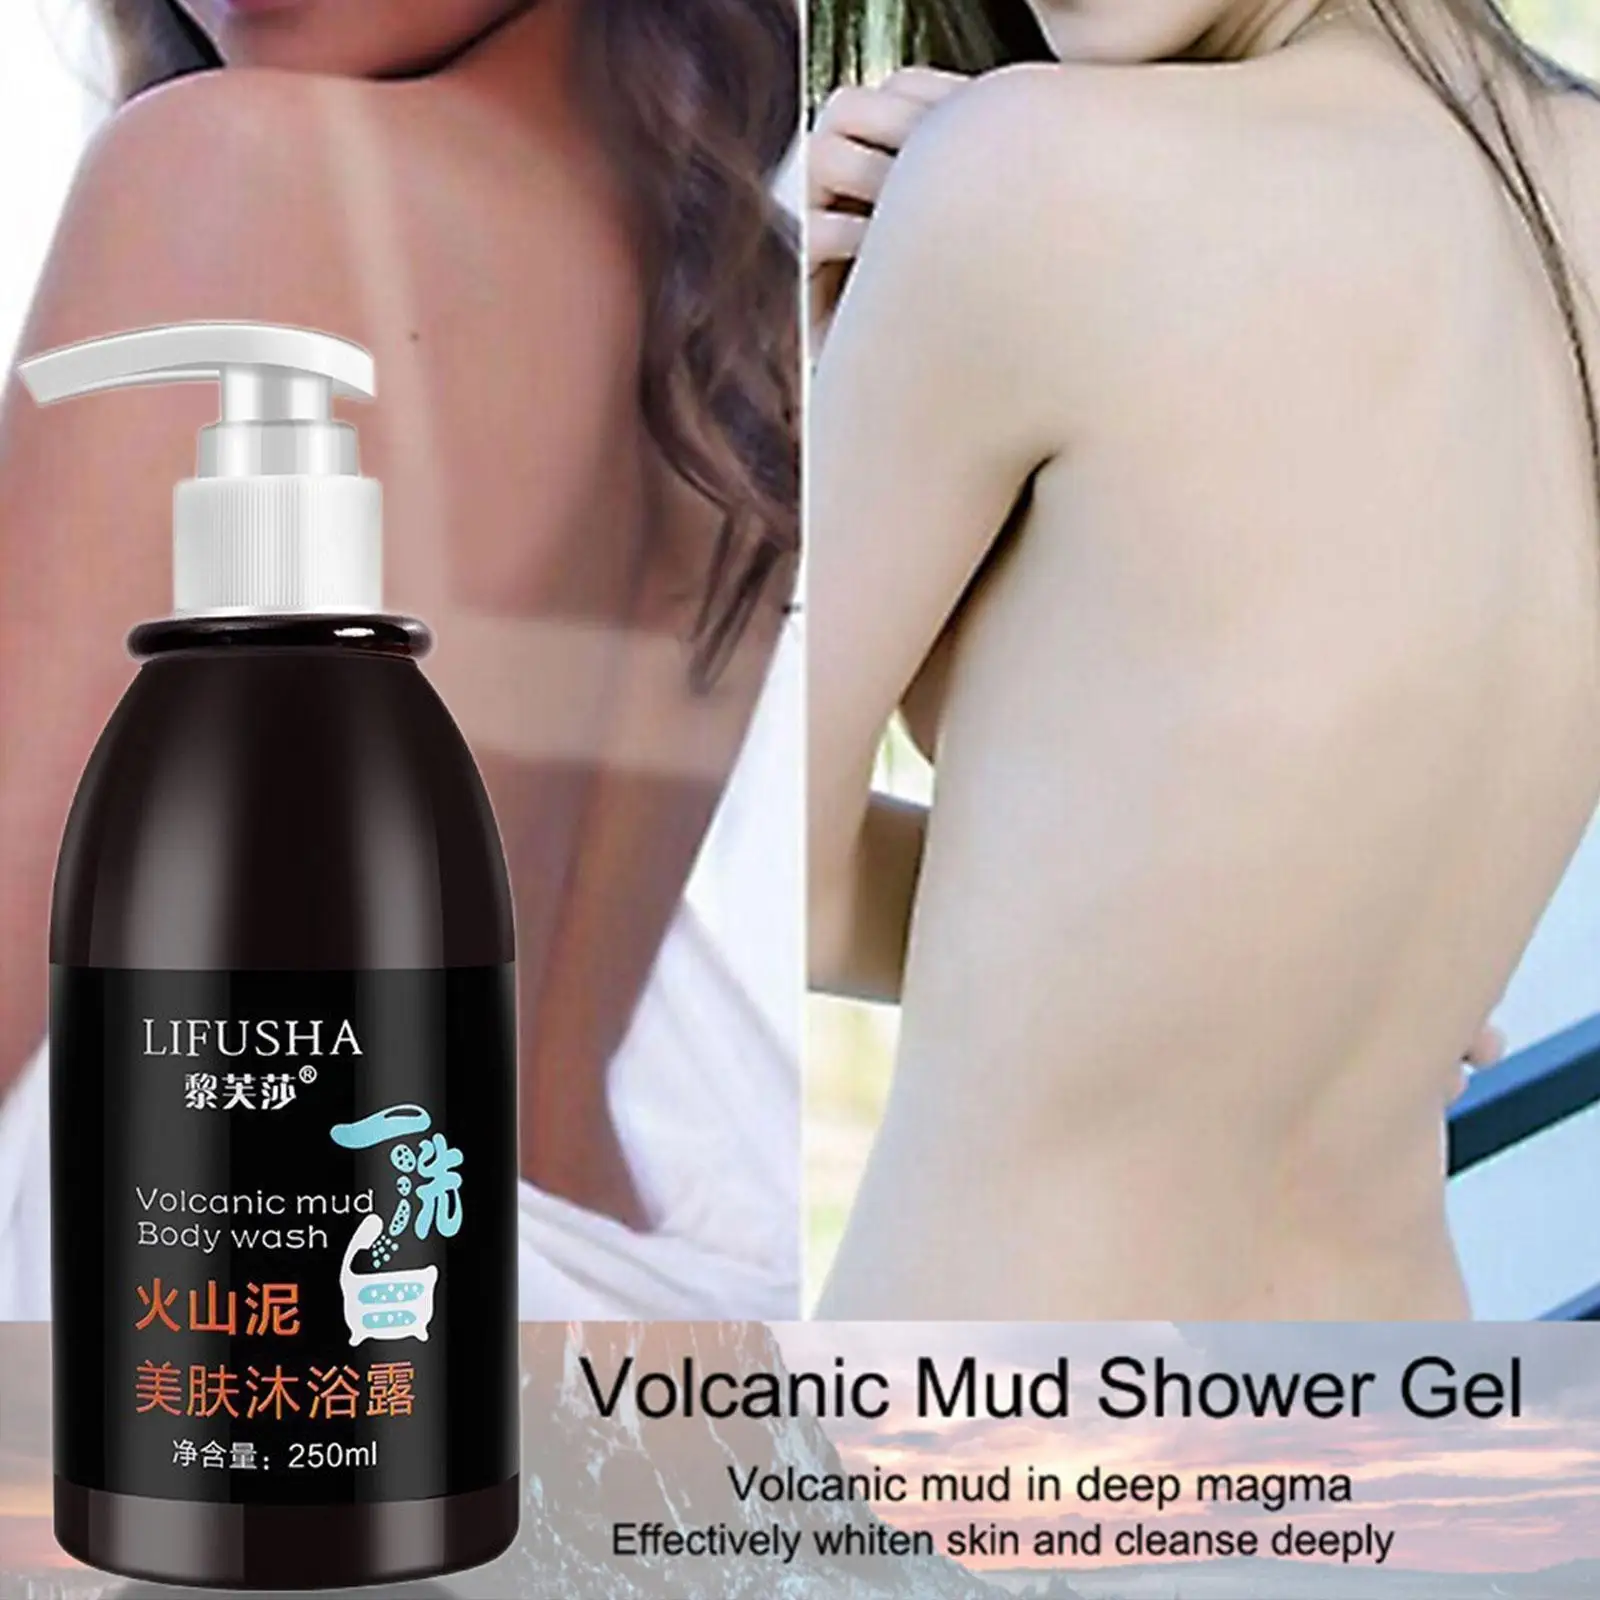 

Volcanic Mud Whitening Shower Gels Whole Body Wash Whitening Fast Body Wash Clean Care Skin Shower 250ml D0C4